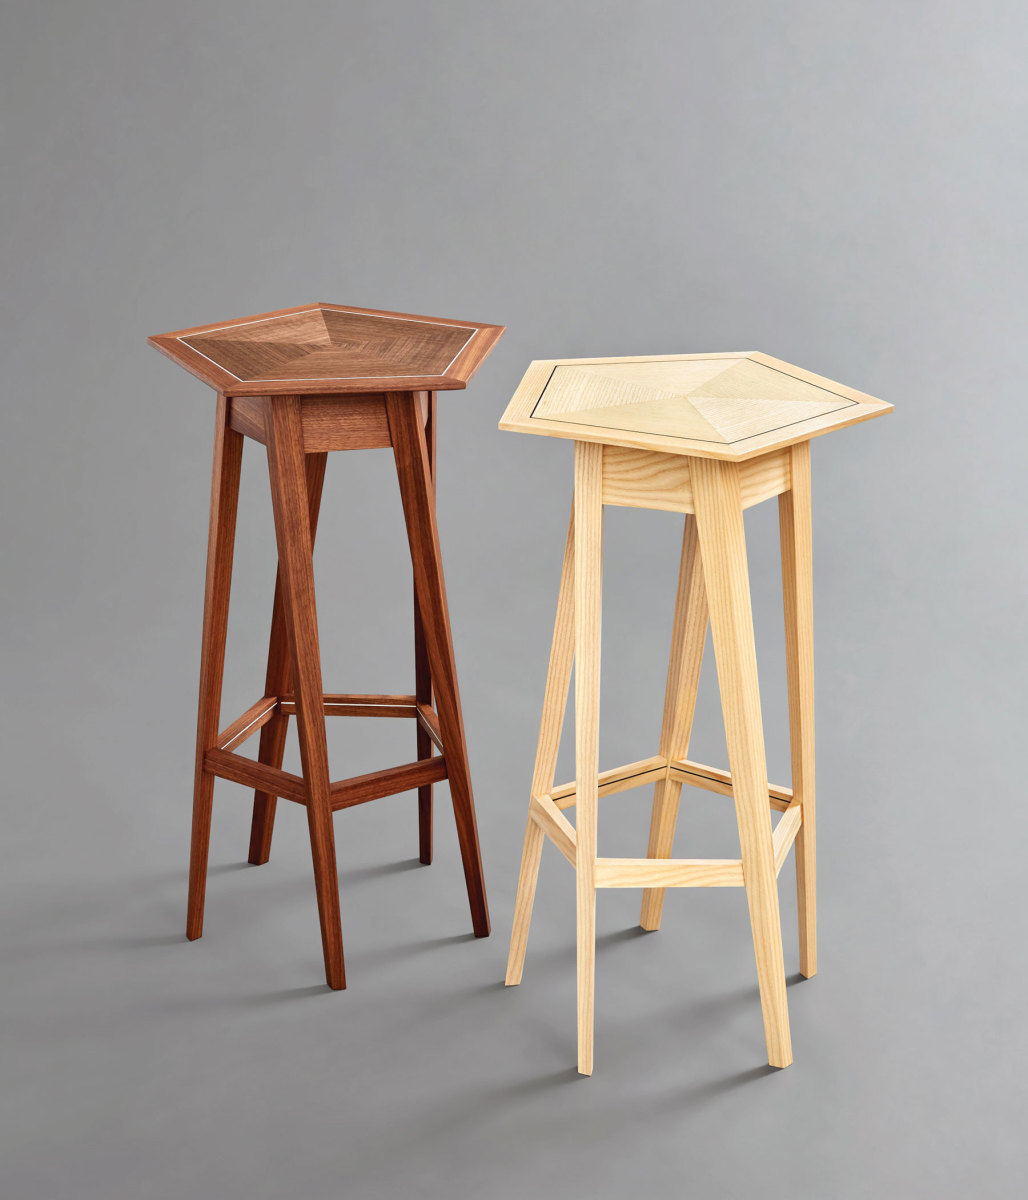 Herman’s take on a stool, “Twist”, in walnut and ash